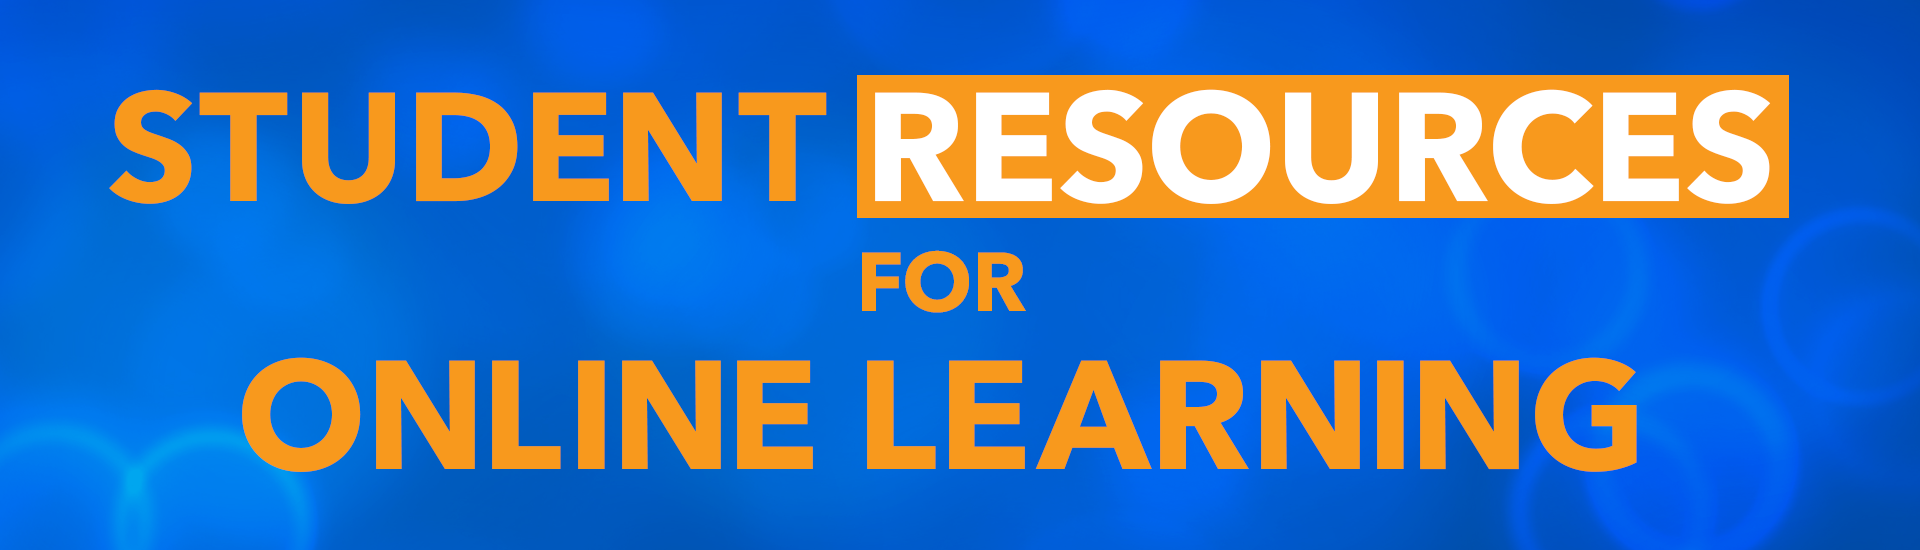 Remote Learning Resources